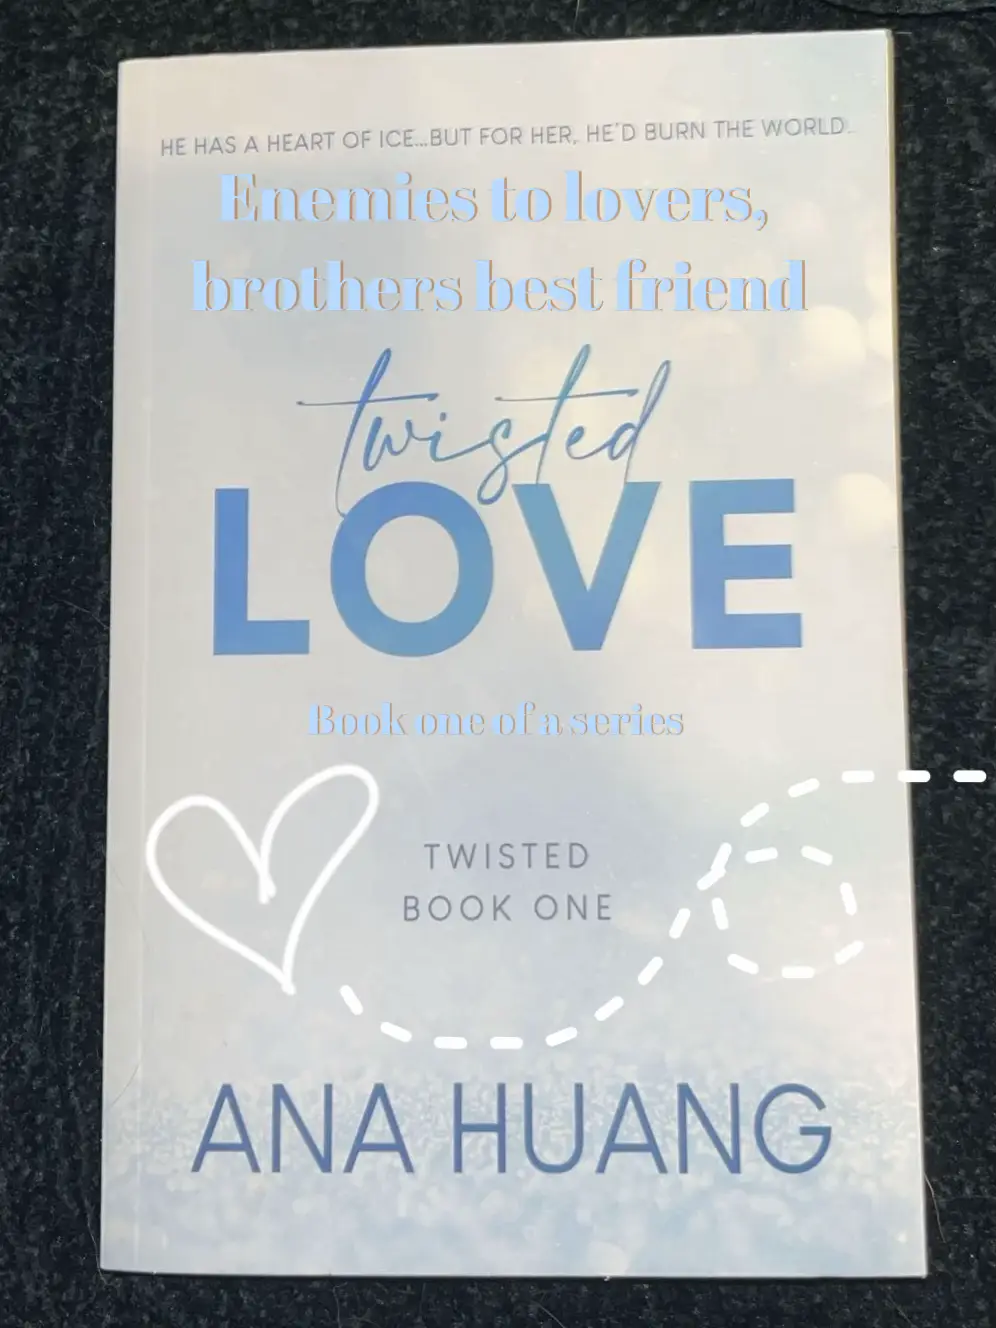 Twisted Love by Ana Huang – Adventures in Literature